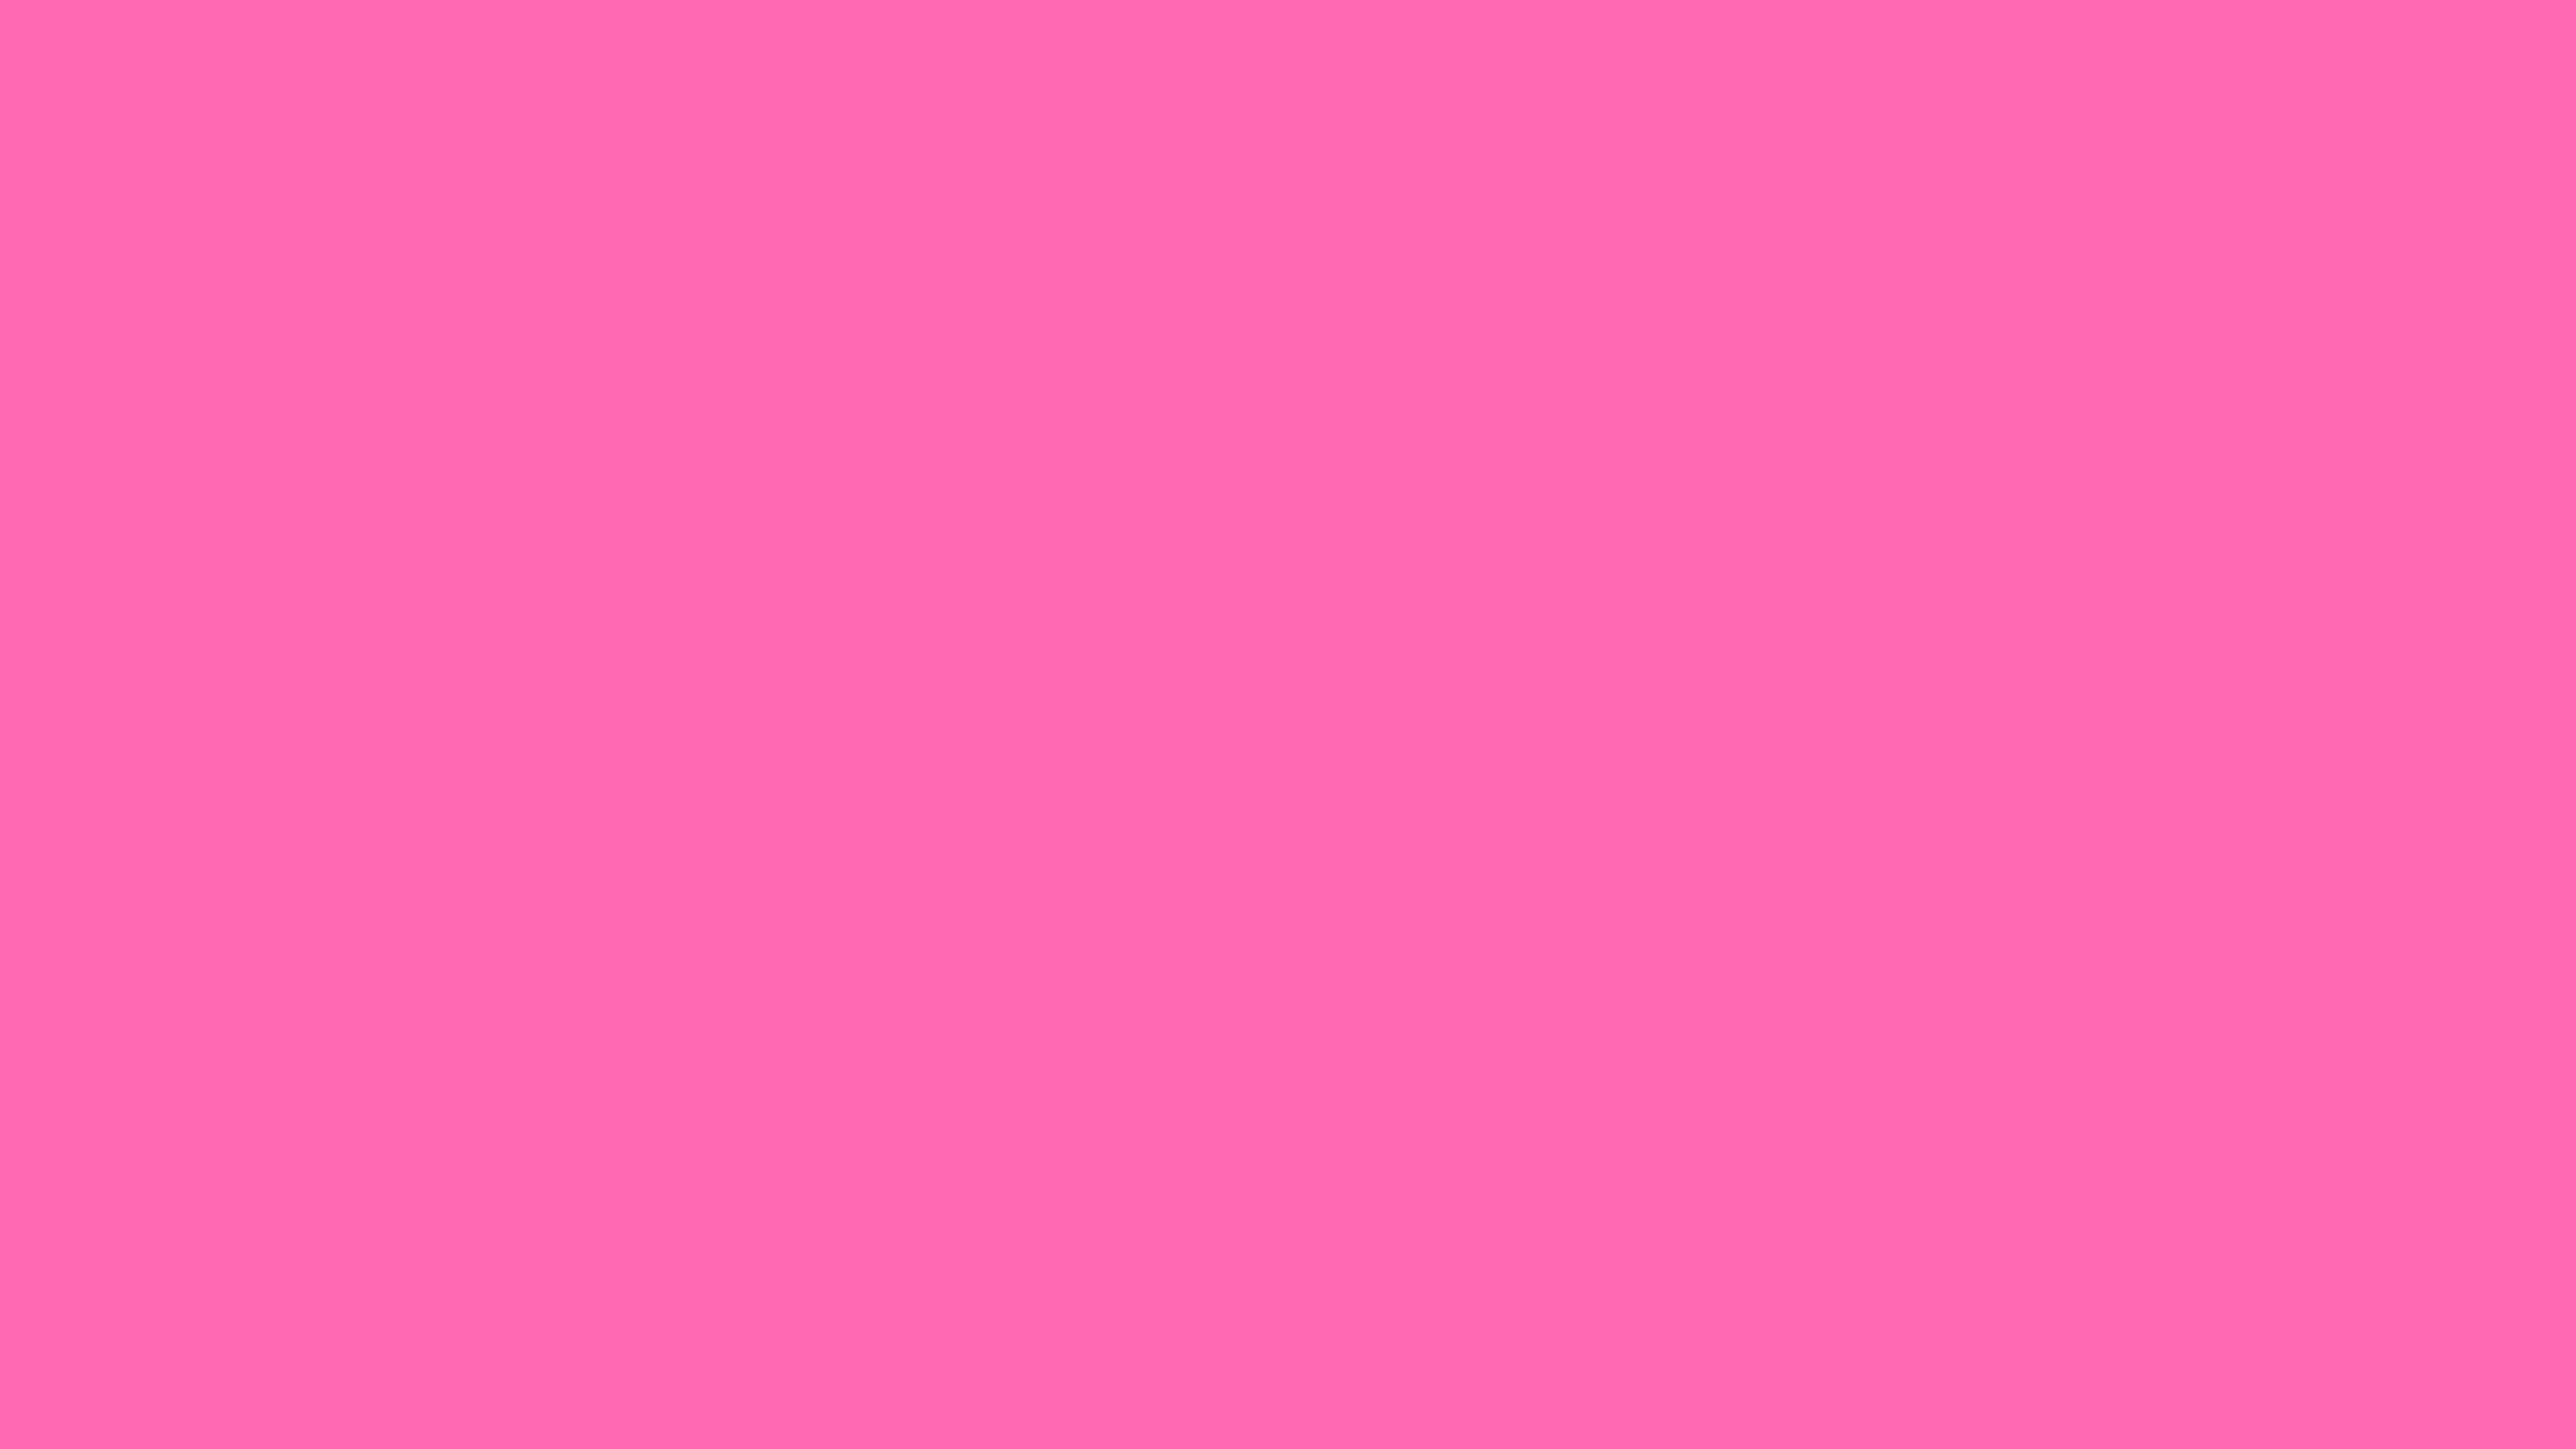 5120x2880 Hot Pink Solid Color Background